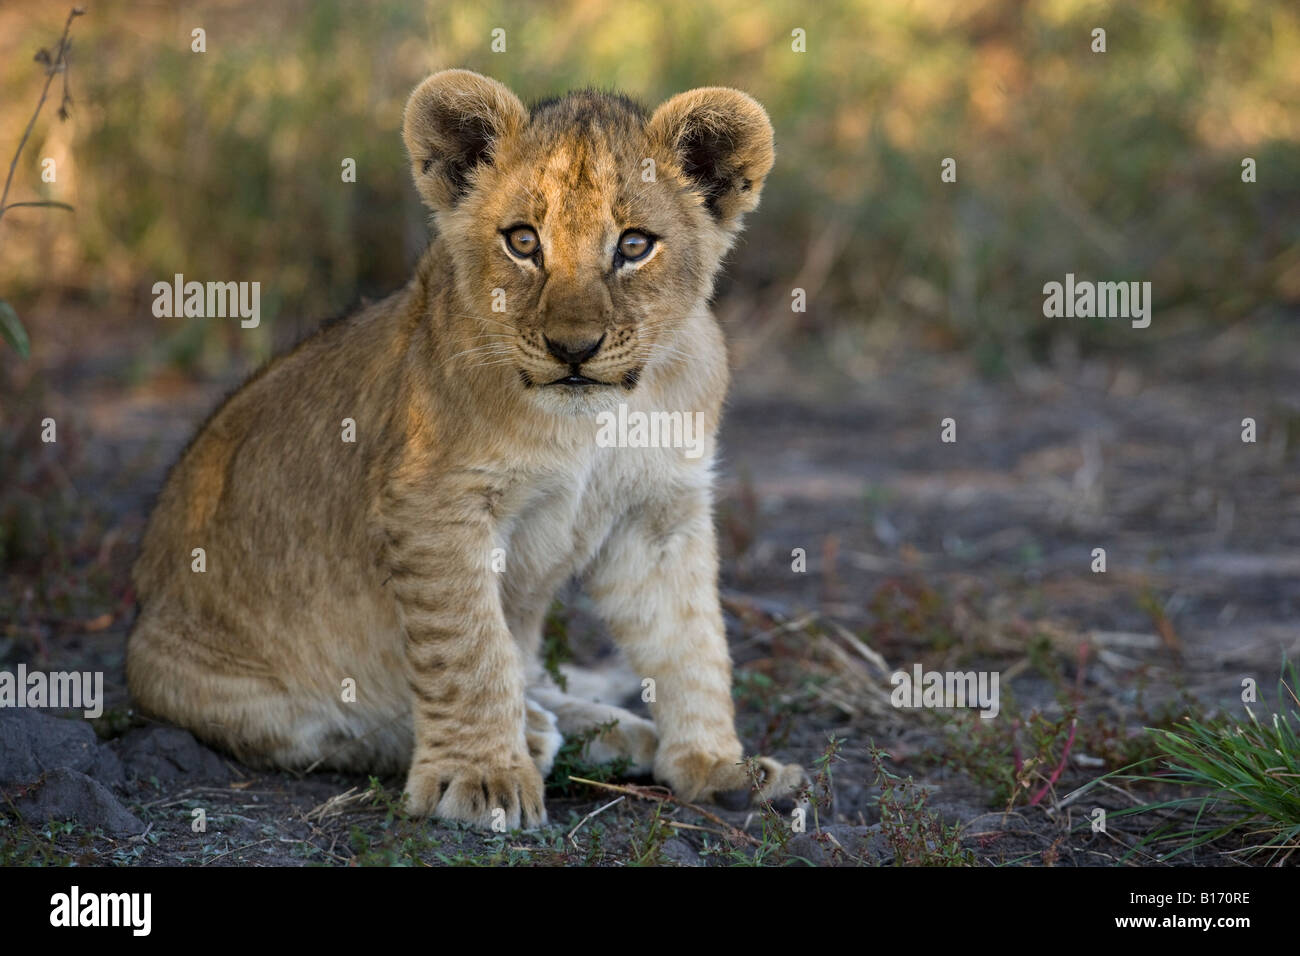 Closeup Alert bright eyed cute baby lion cub, warm sunlight on face, sitting in cool shade intently looking ahead in Okavango Delta of Botswana Stock Photo